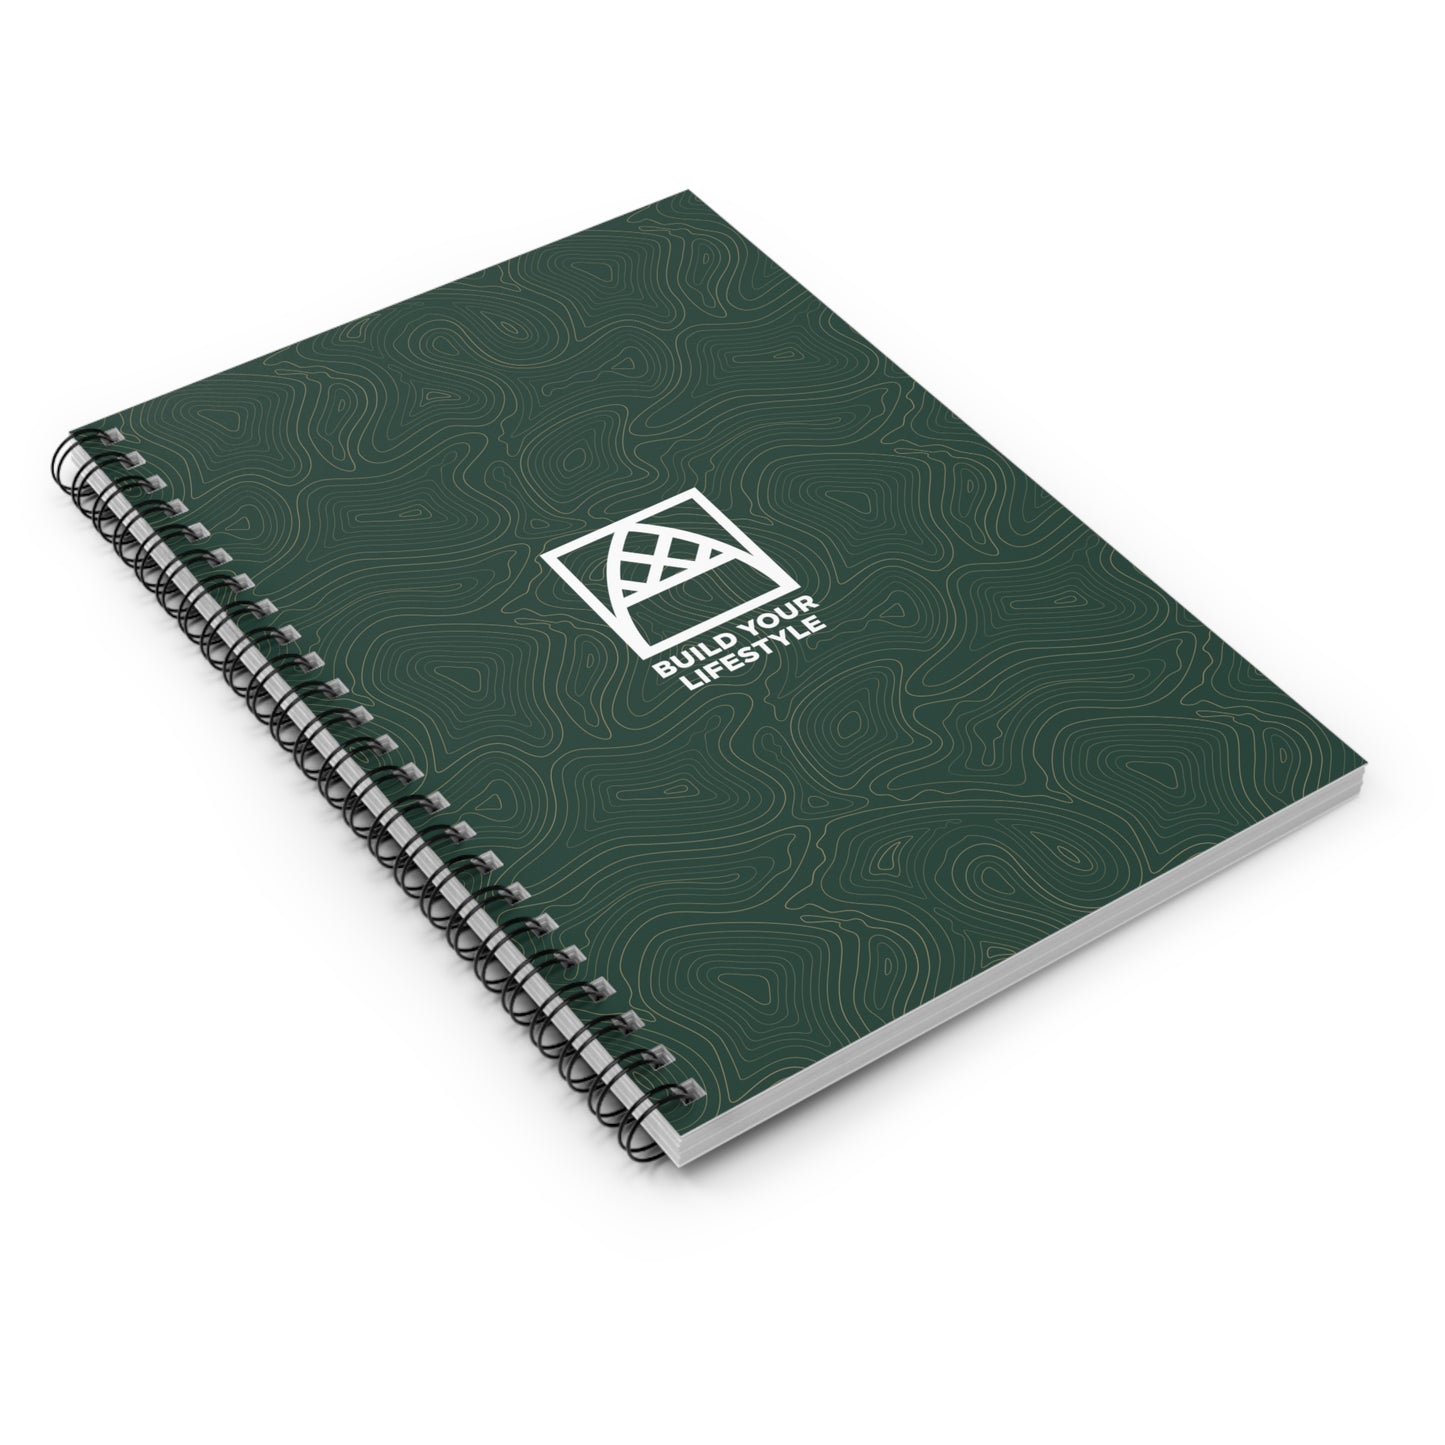 Arched Cabins LLC " Build Your Lifestyle" Spiral Notebook - Ruled Line